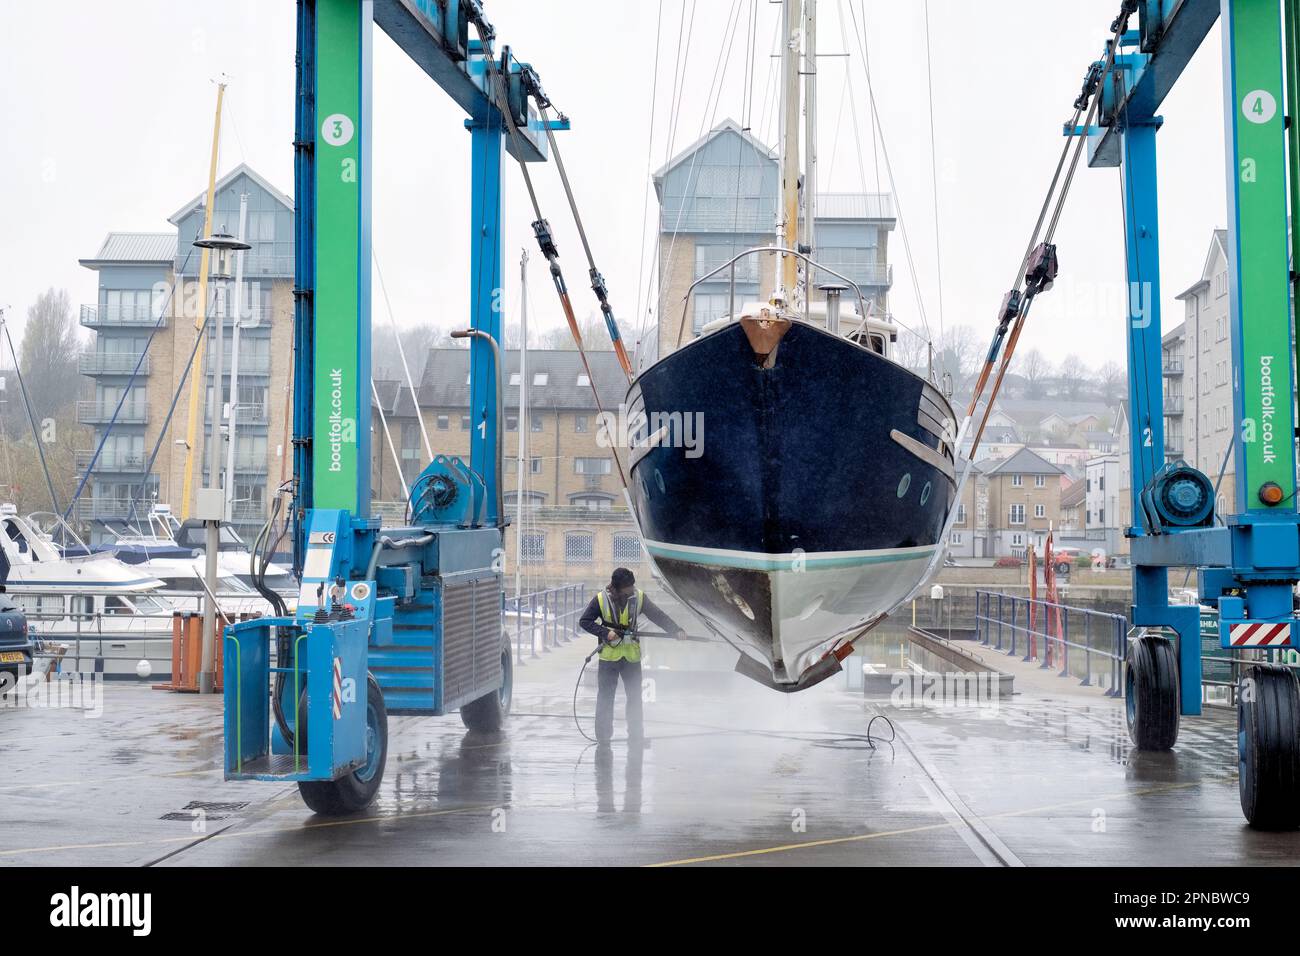 A female boat yard maintenance operator cleans the hull of a boat lifted from the water in Portishead Marina UK. the boat is held in a Wise Boat Hoist Stock Photo